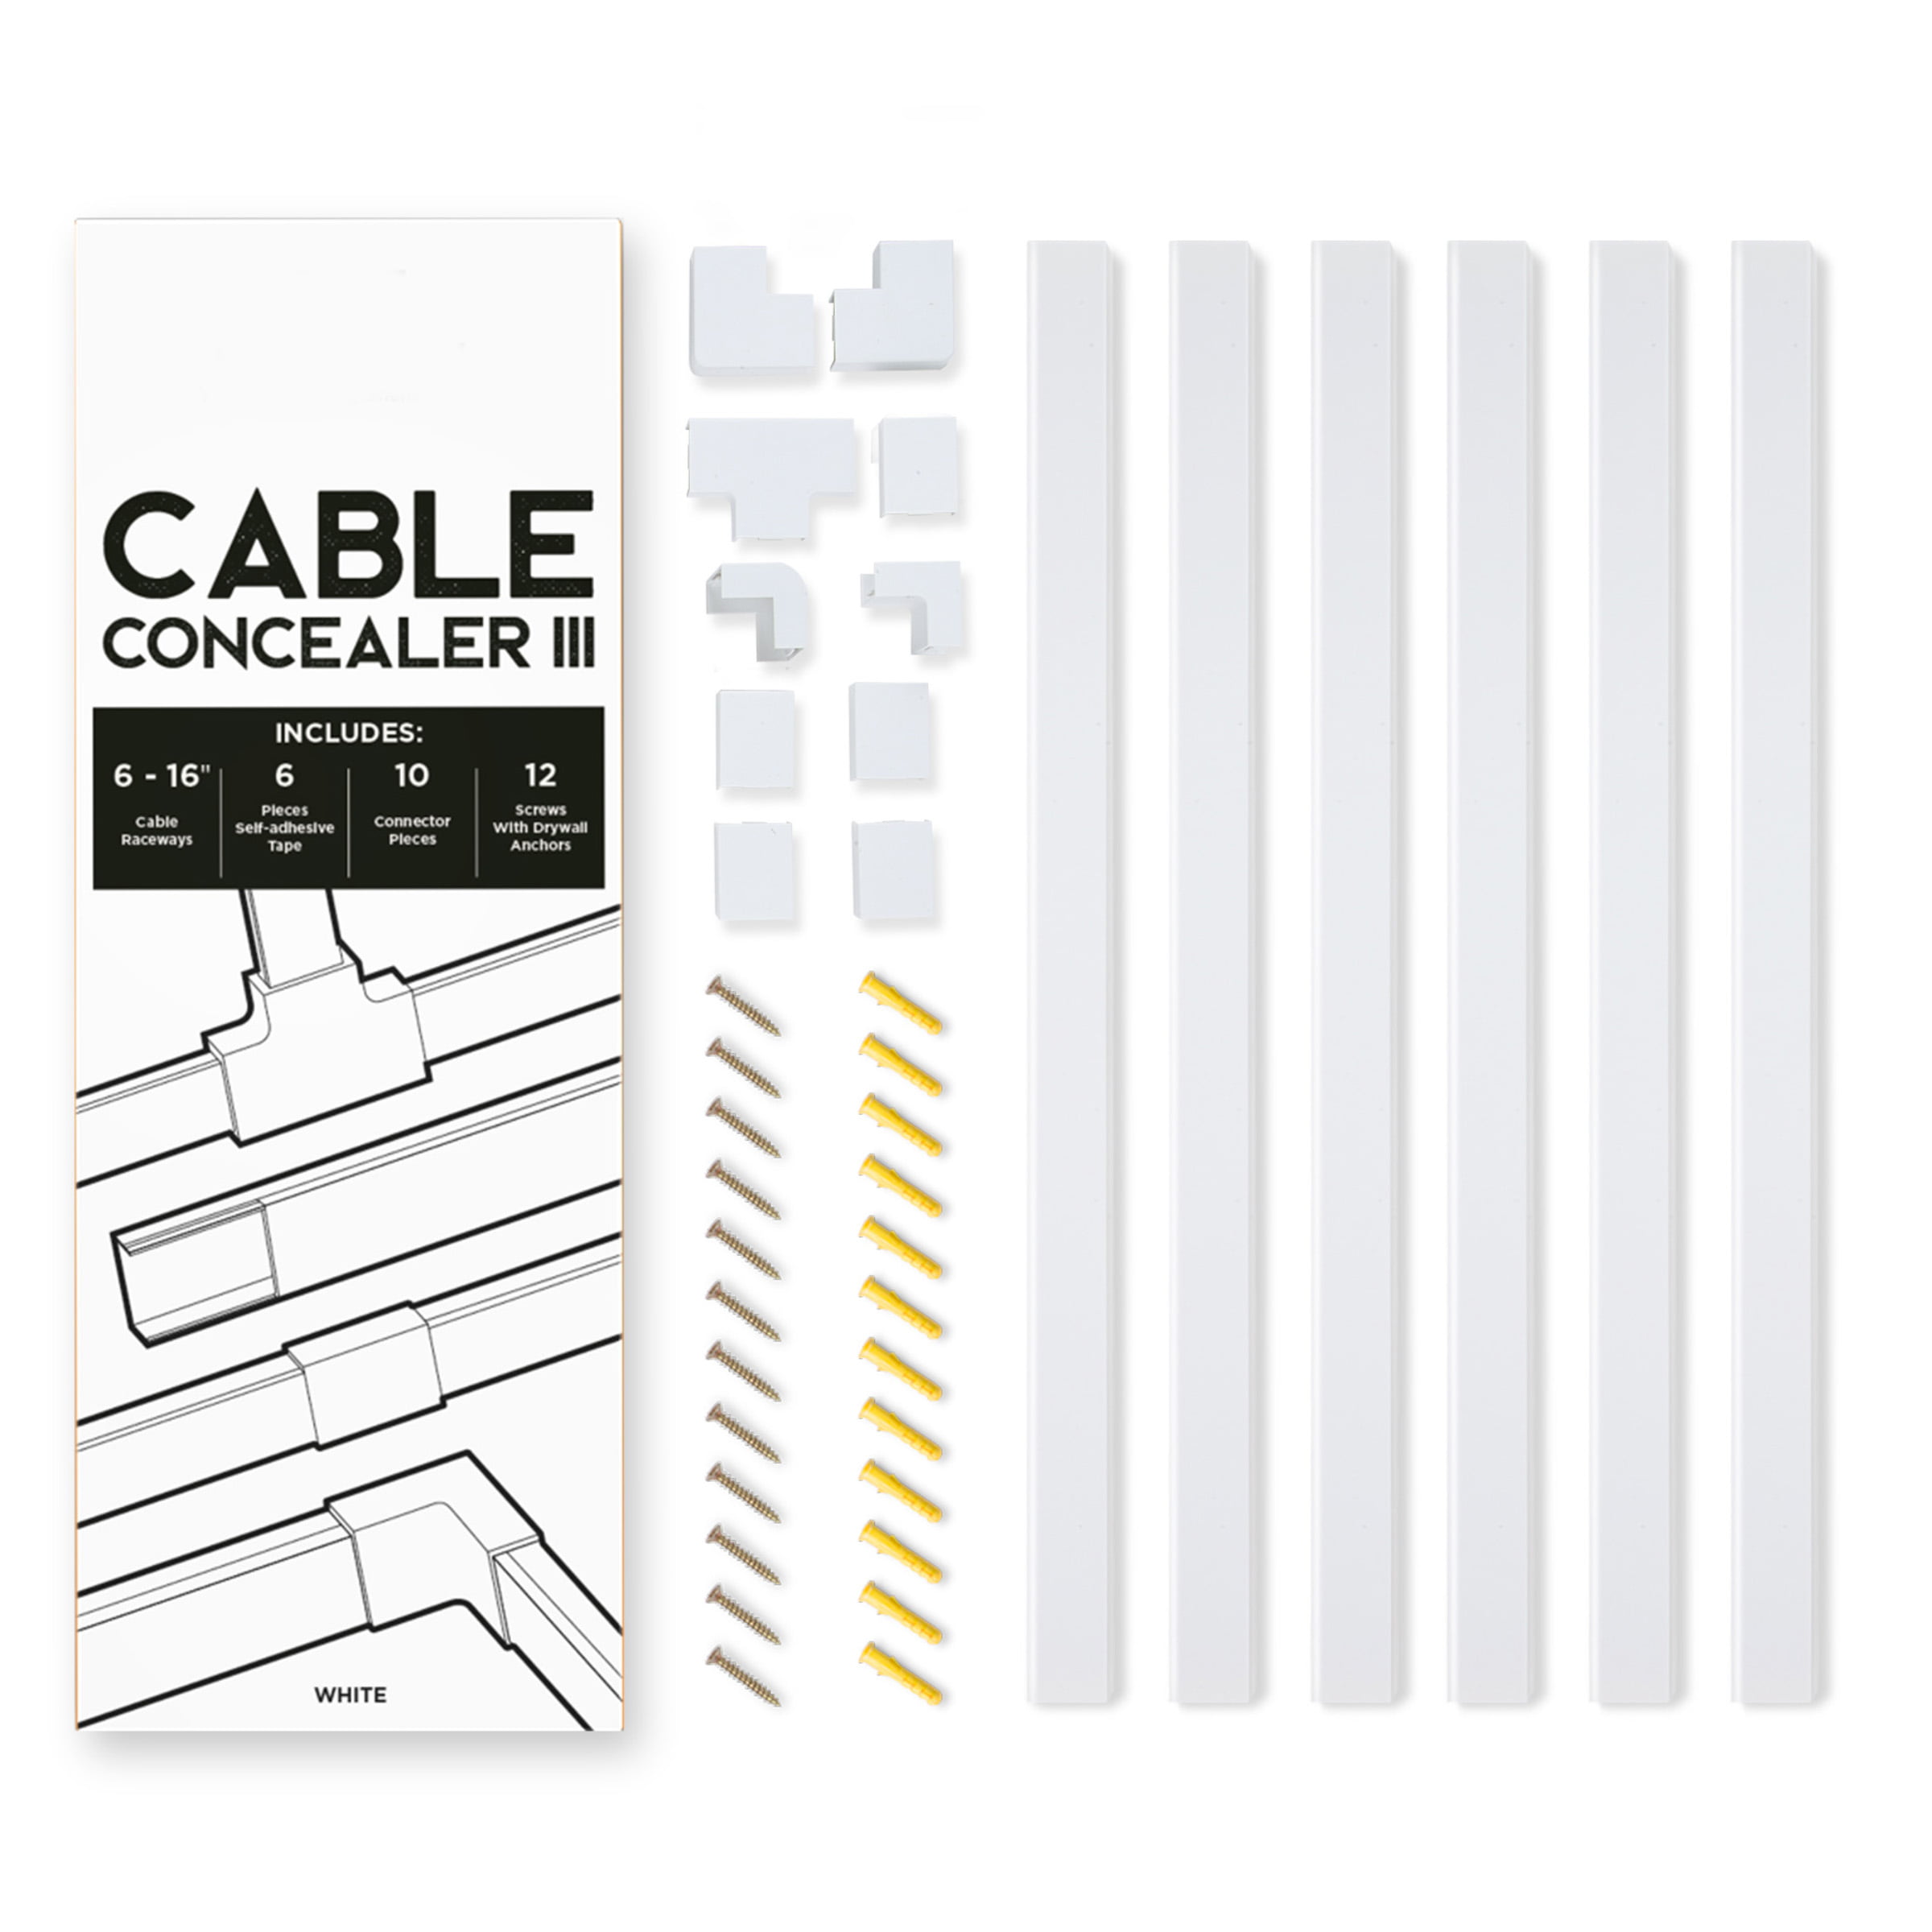 On-Wall Cable Concealer Kit Hides TV Cords, 4X 11 inch White Cable Raceways  Can Be Fit Together to Any Length for Home Theater, TV and Office